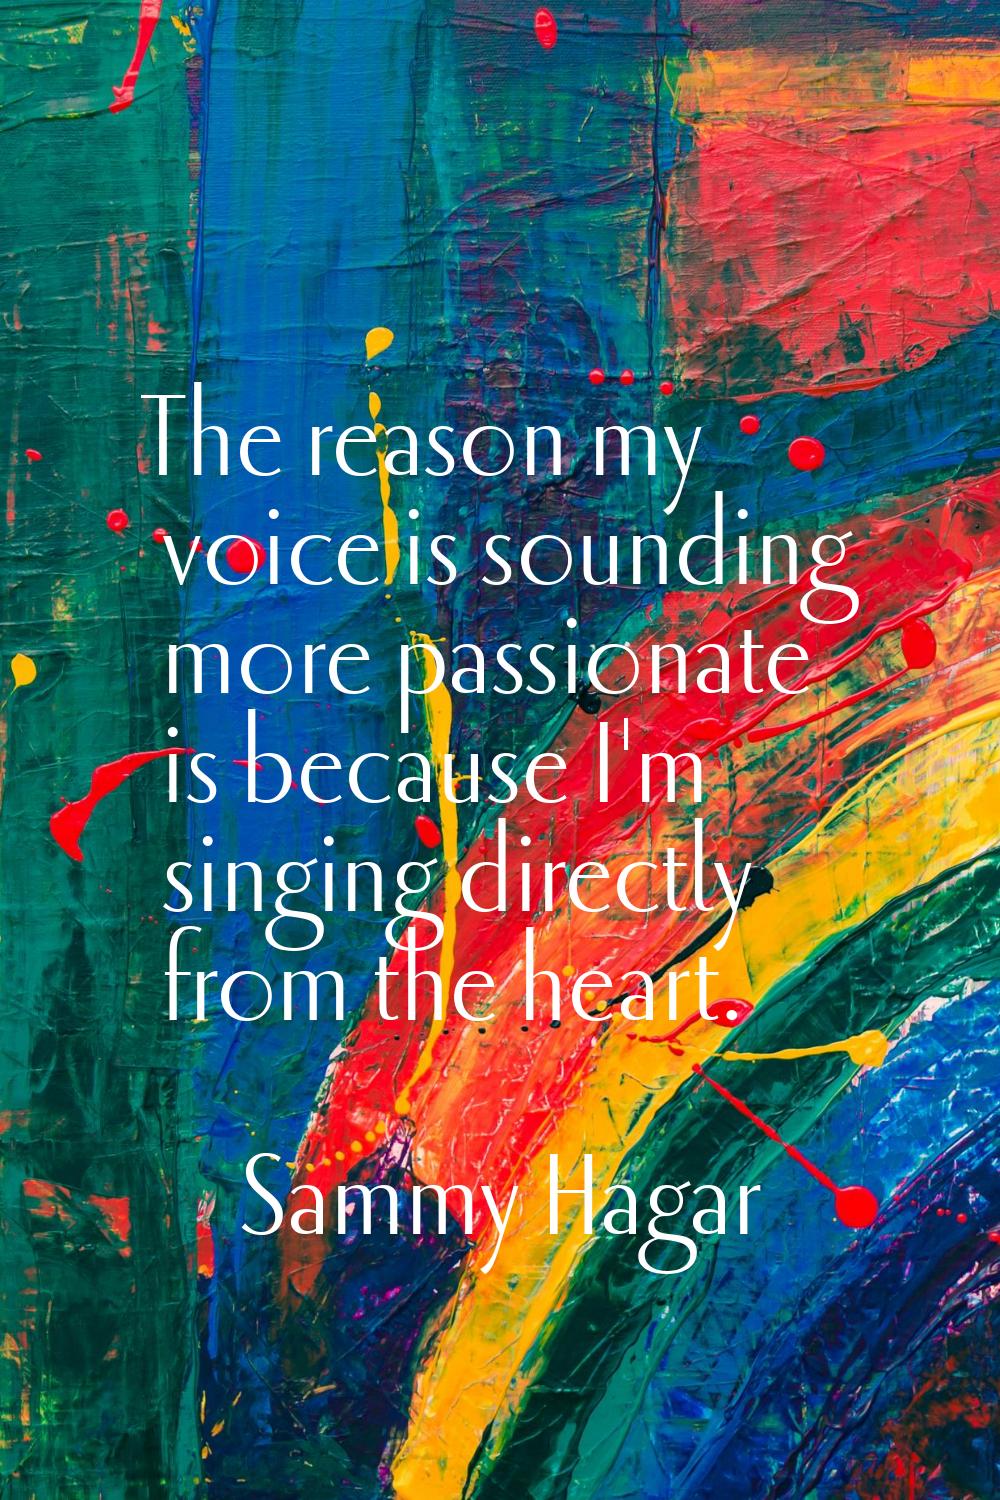 The reason my voice is sounding more passionate is because I'm singing directly from the heart.